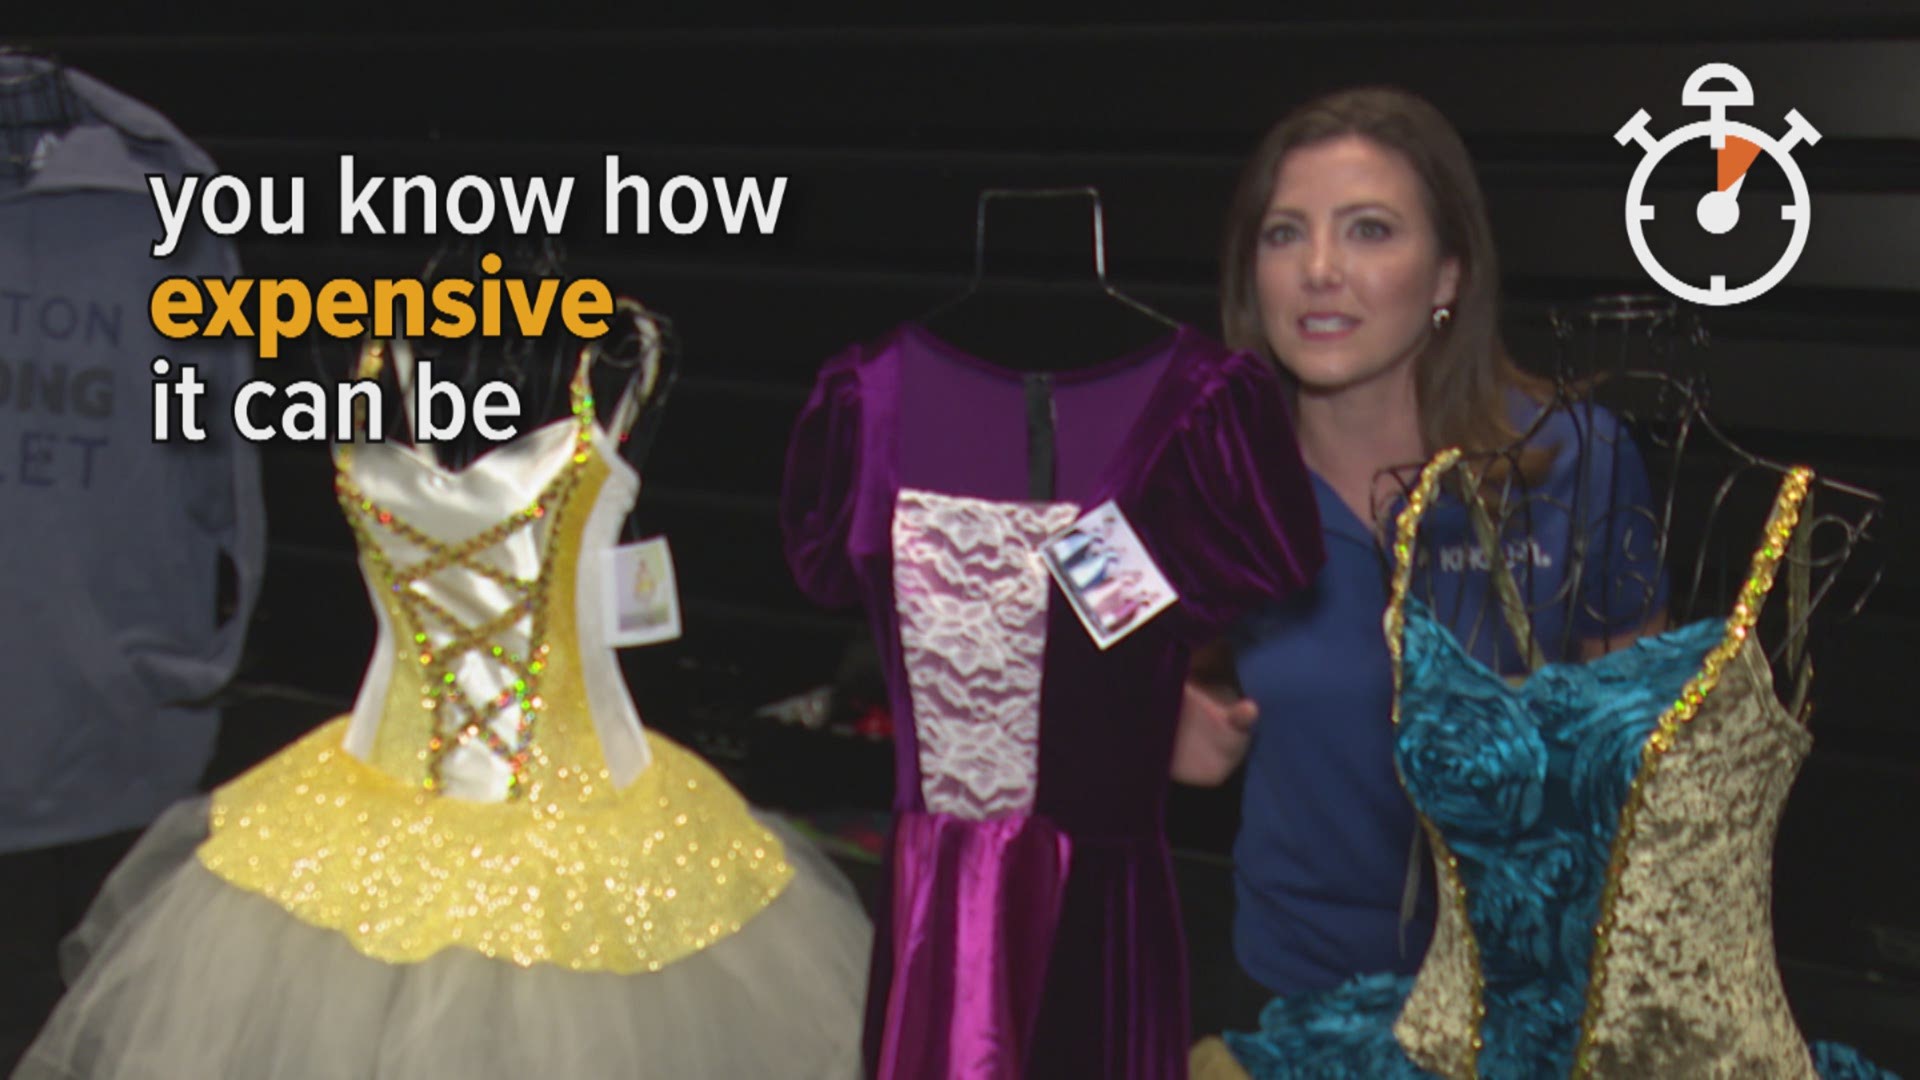 The idea behind the costume giveaway is similar to Supermarket Sweep.